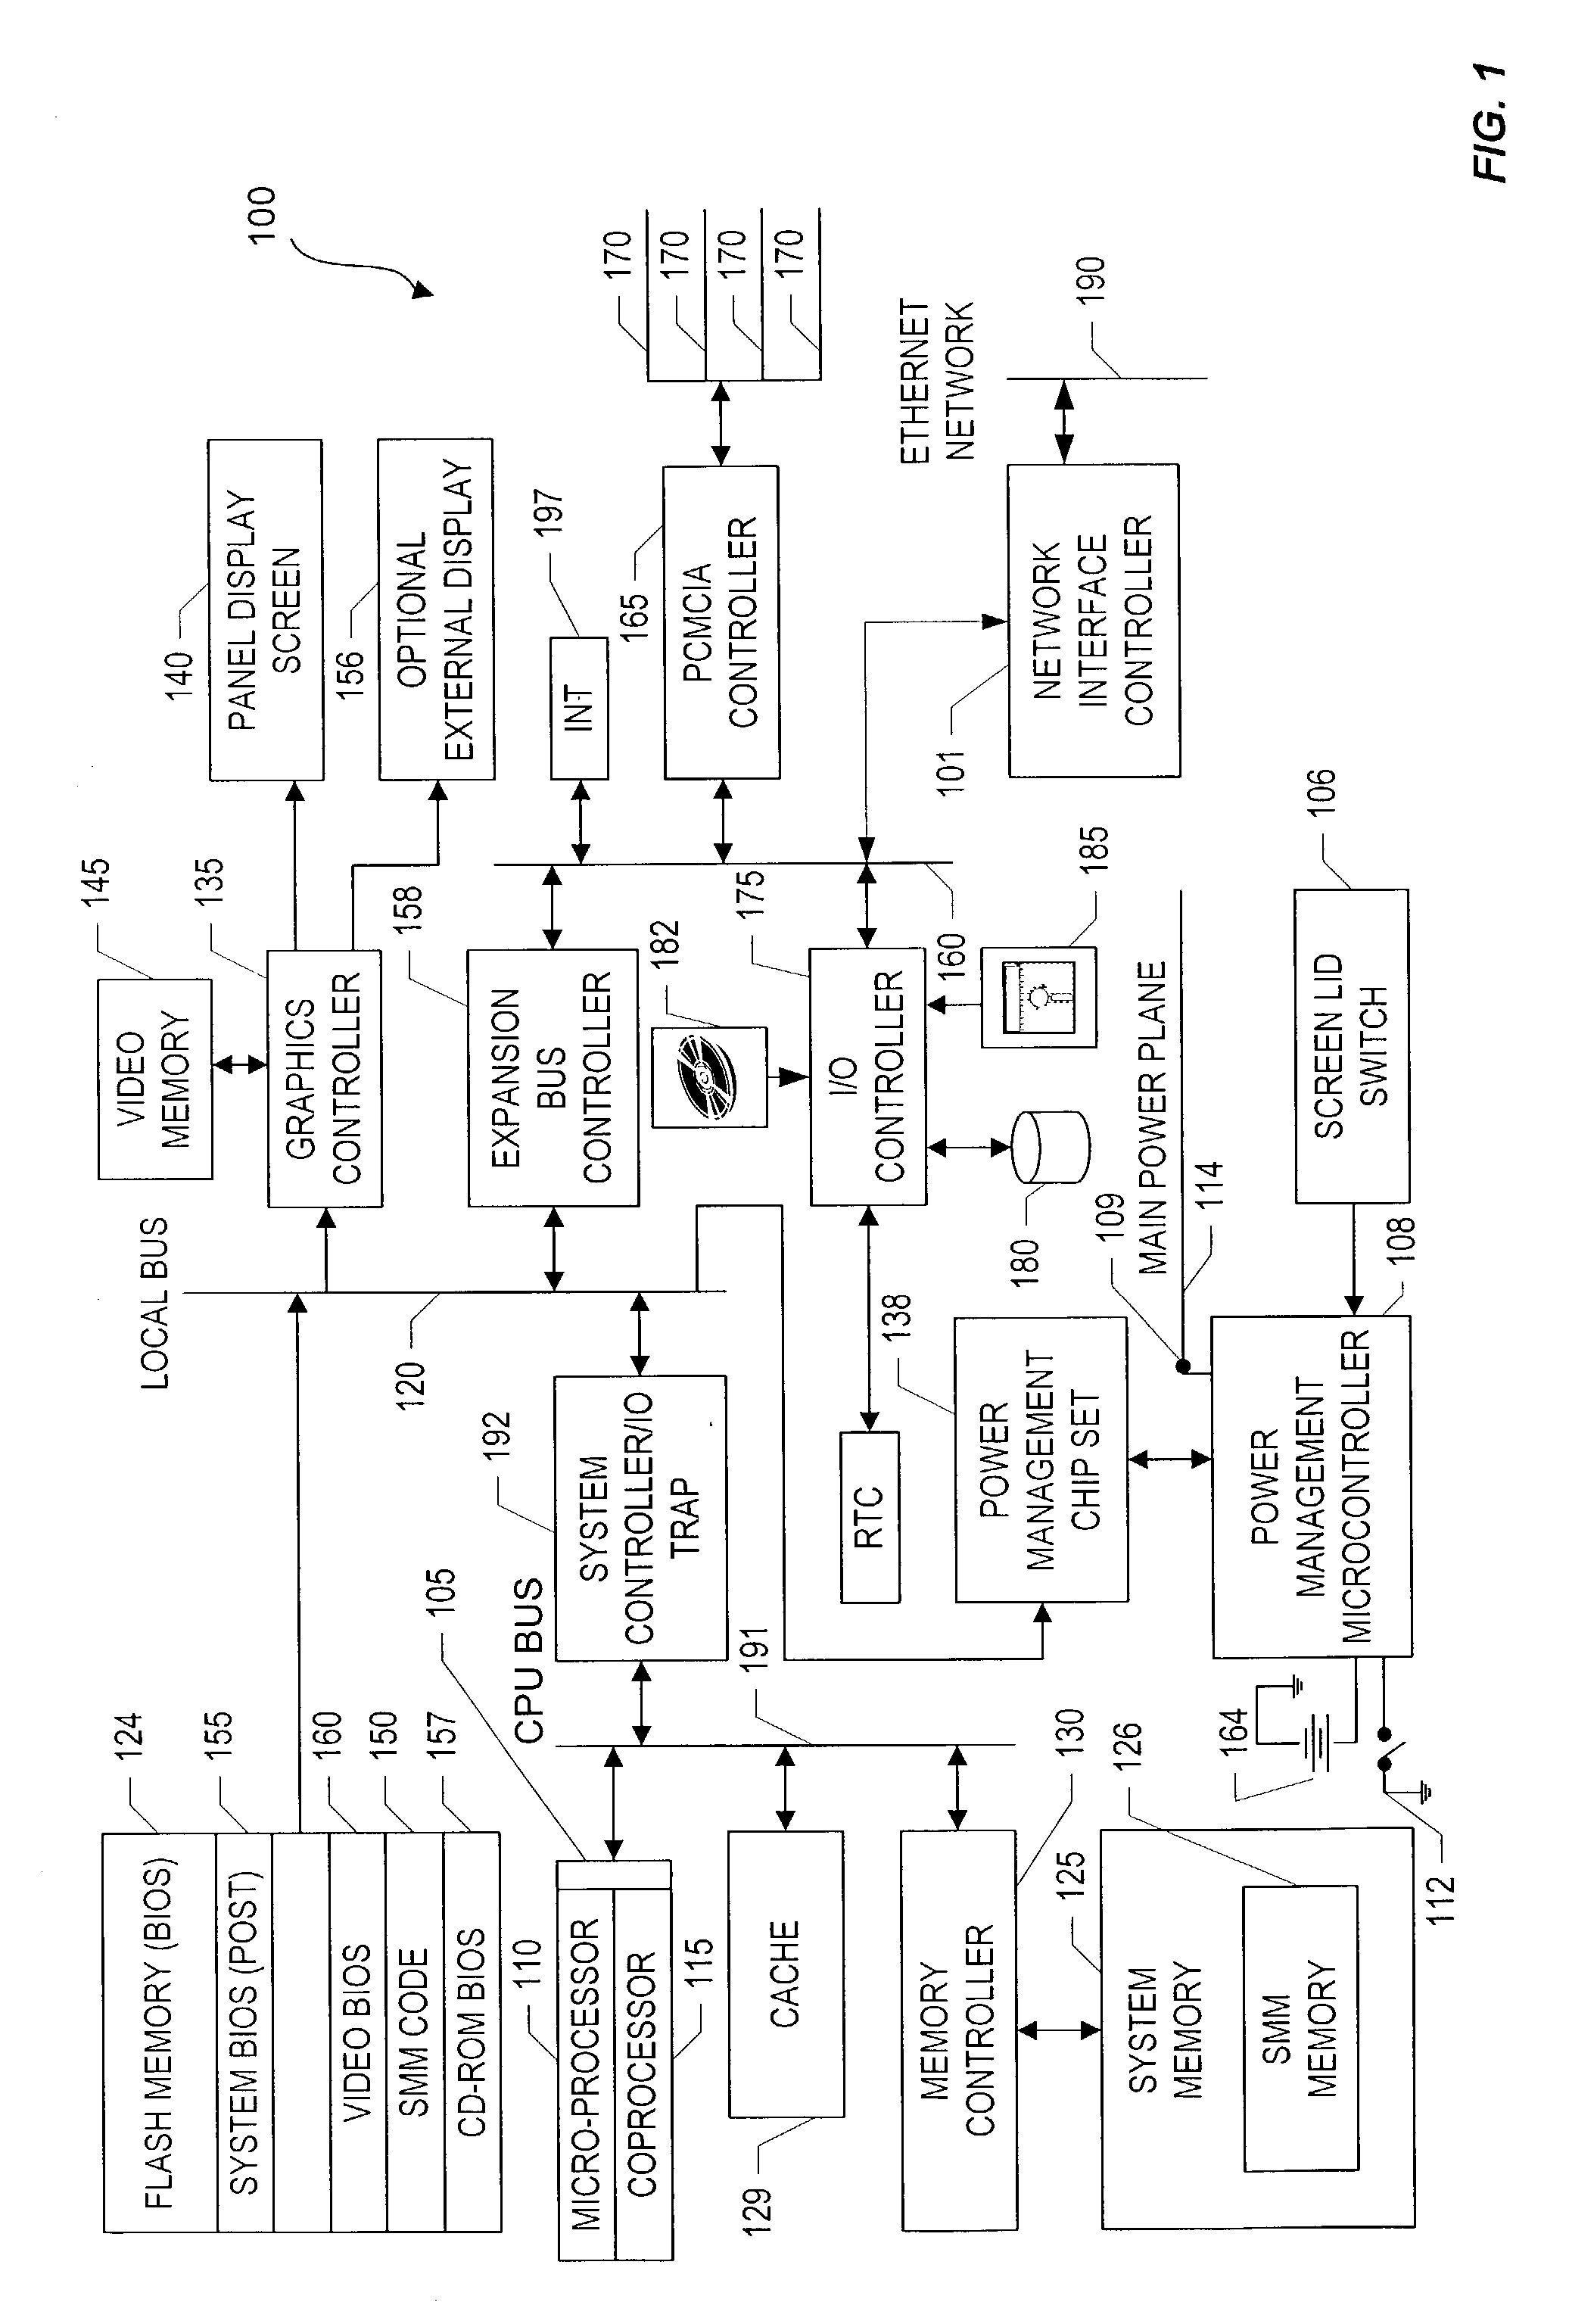 DC-DC controller with integrated SMbus registers for dynamic voltage positioning